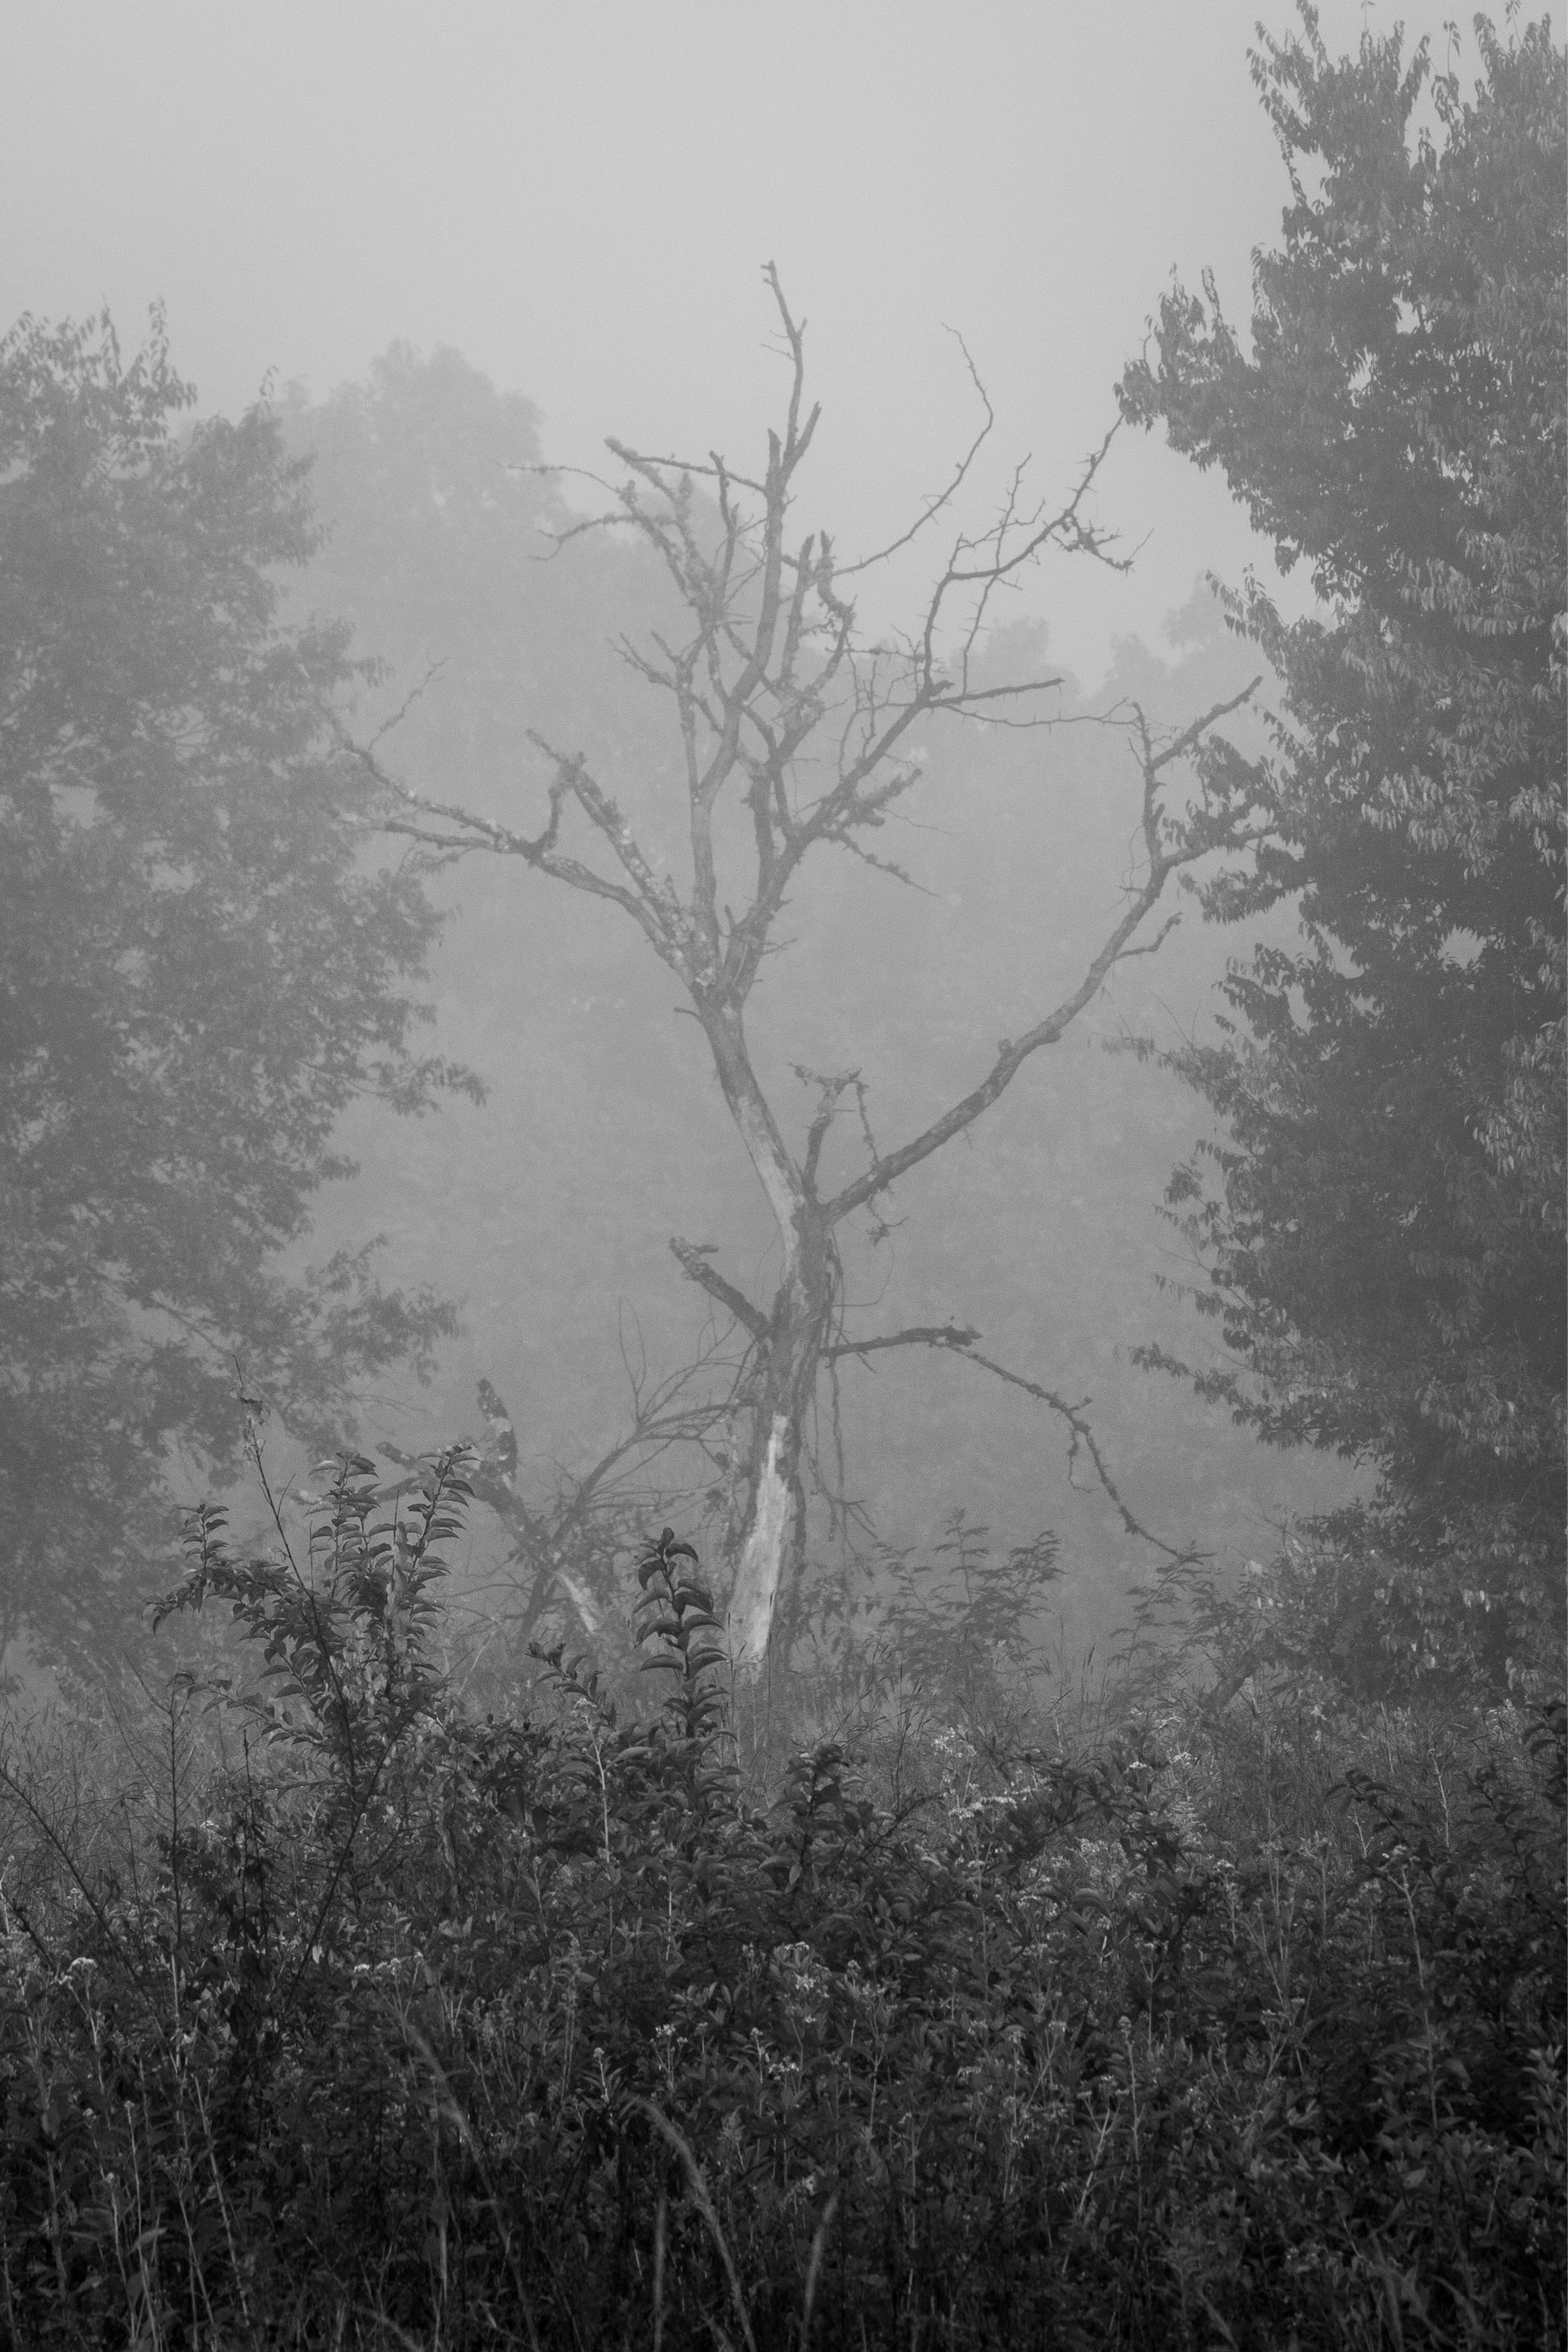 I went searching for birds a few weeks ago, but the fog that morning and how it lingered over this dead tree caught my attention.